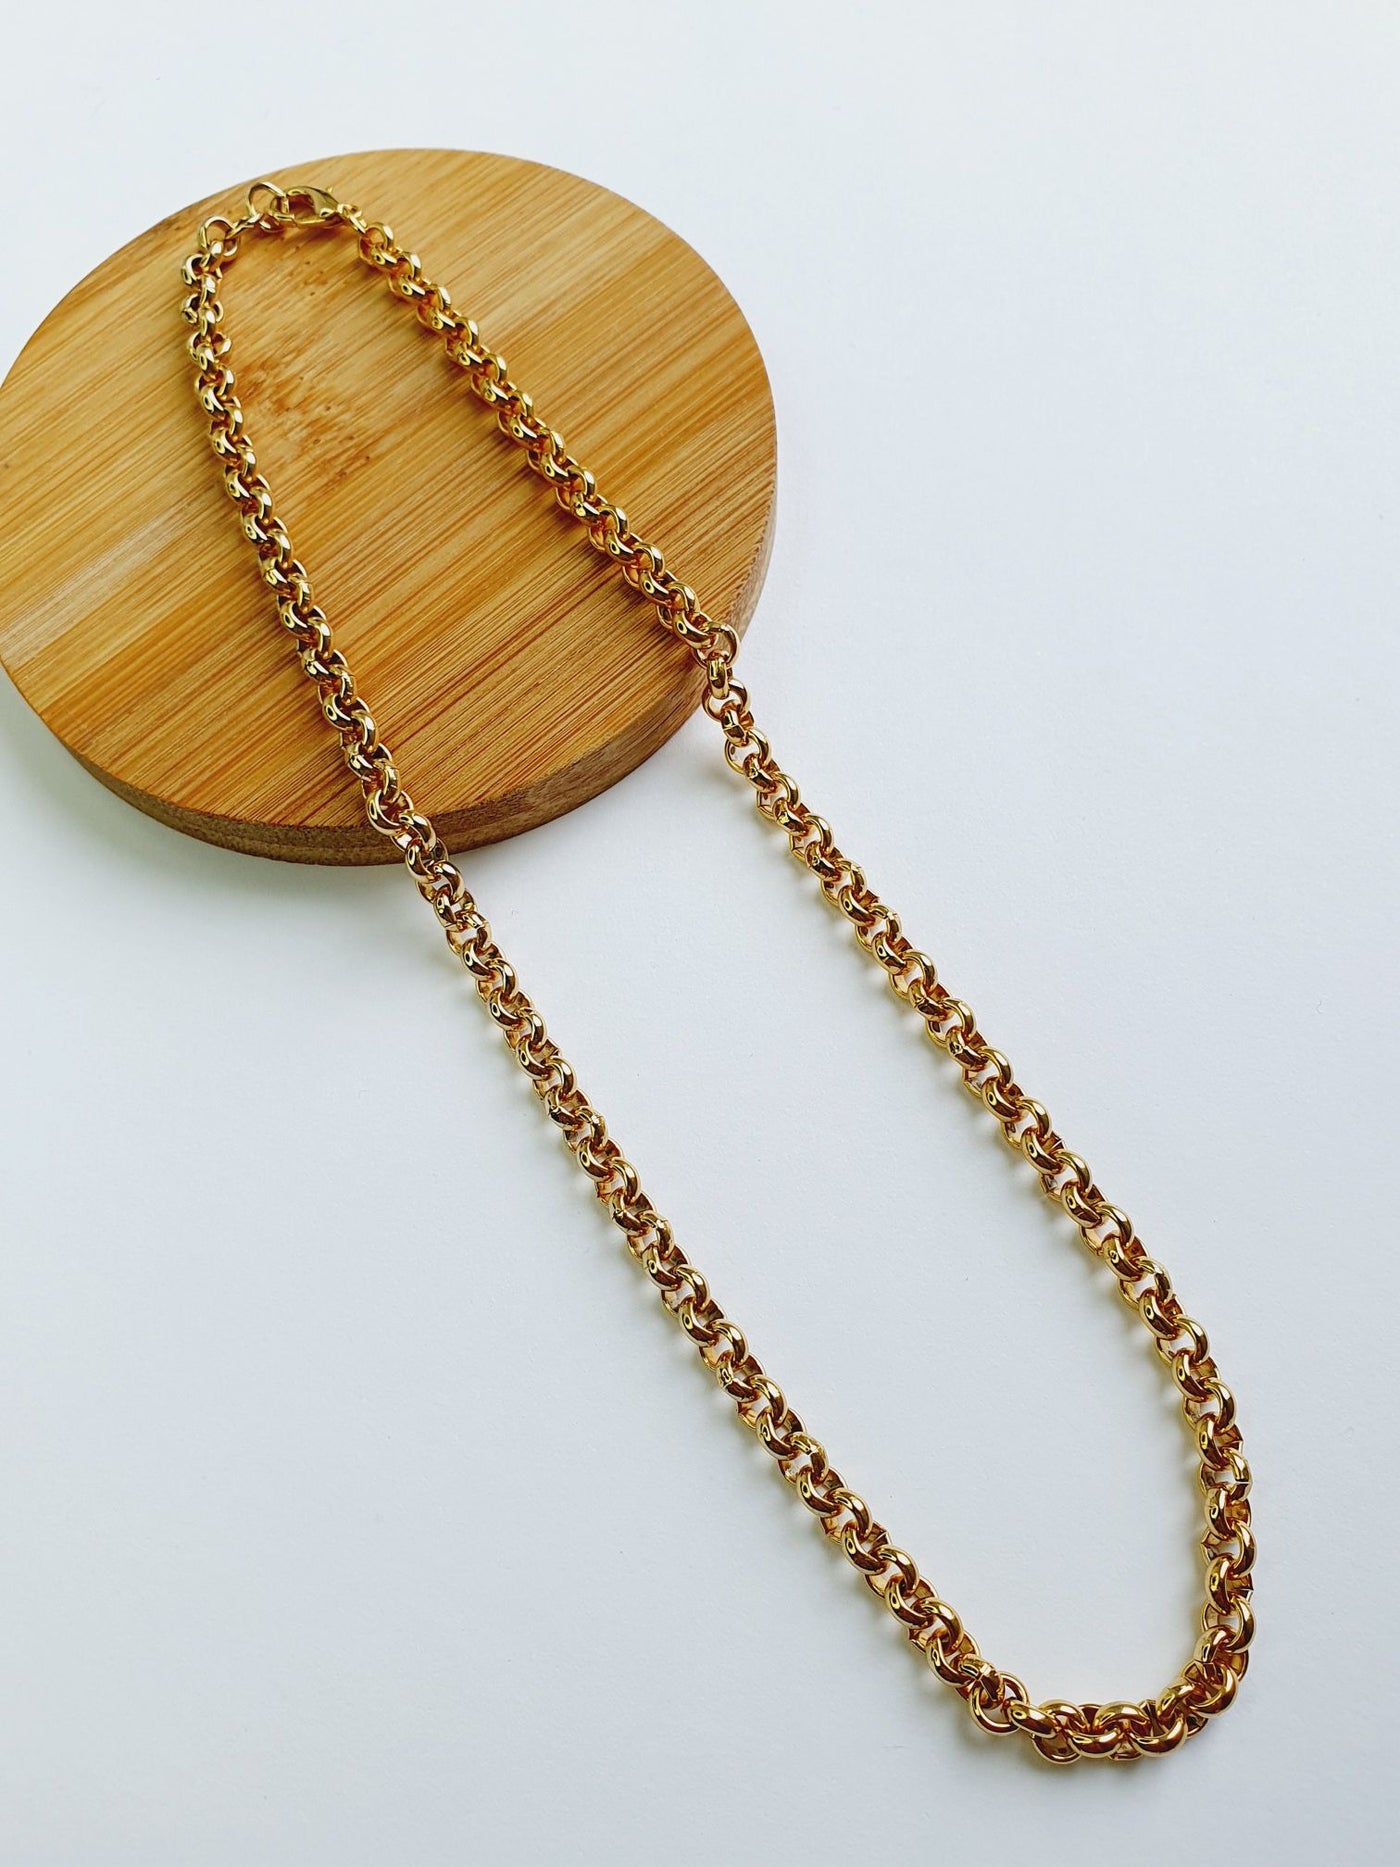 Vintage Gold Plated Rolo Chain Necklace